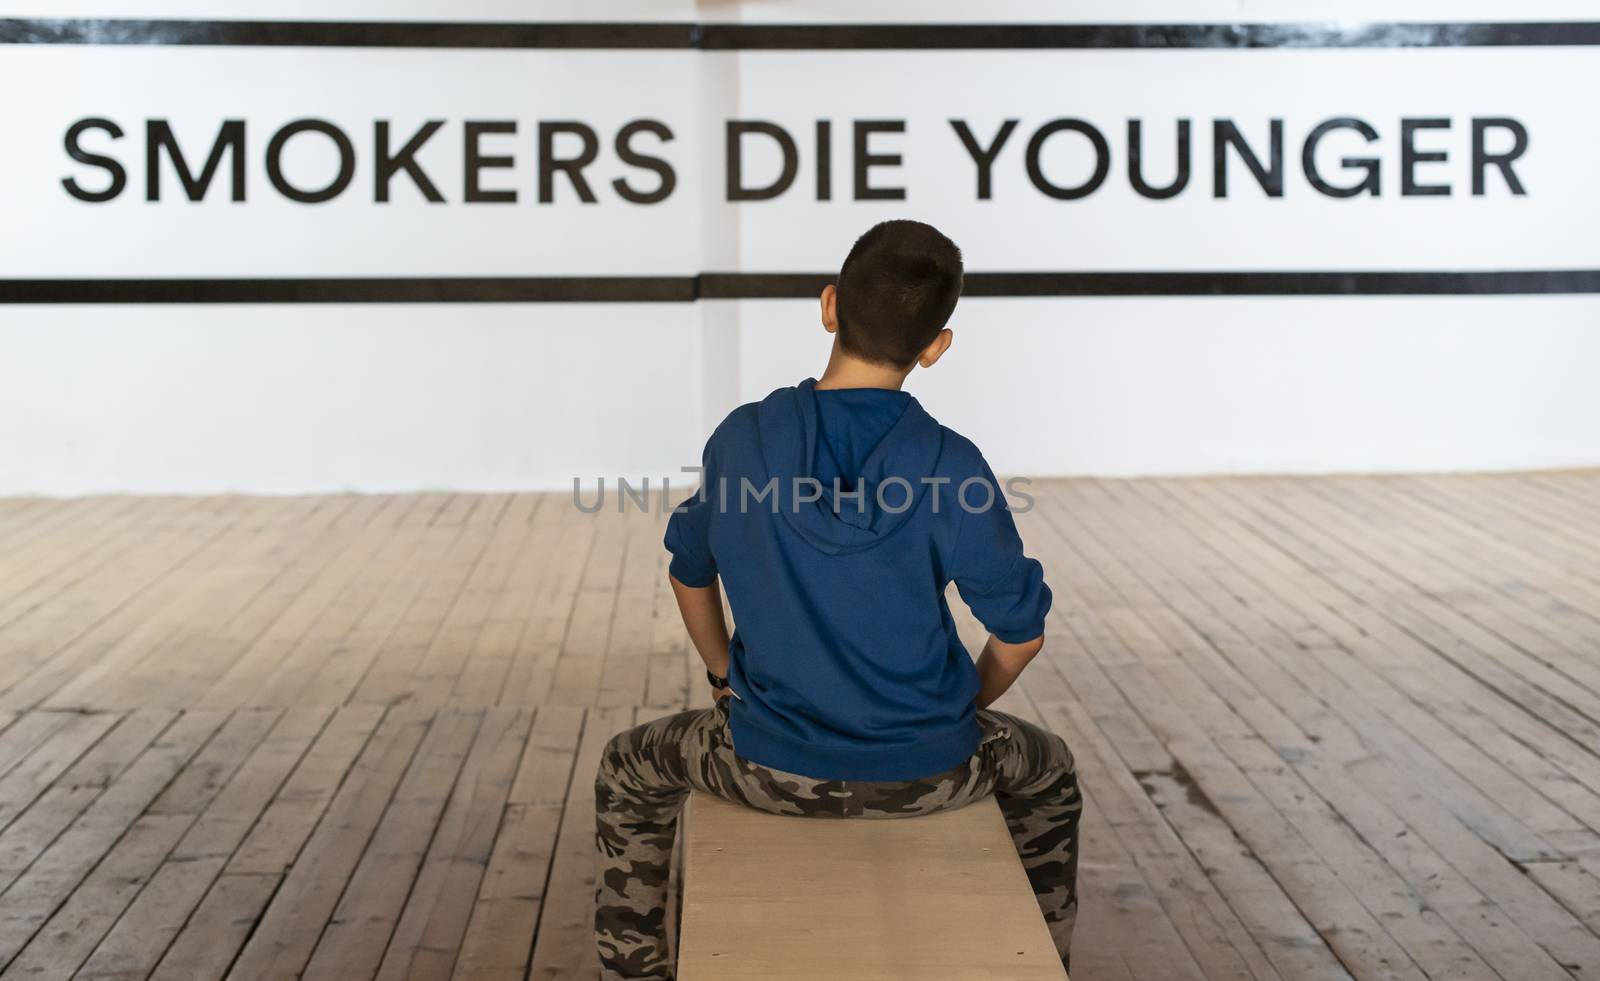 Teenager smoking and message on wall - Smokers die younger. No smoking concept with child. Casual clothes.